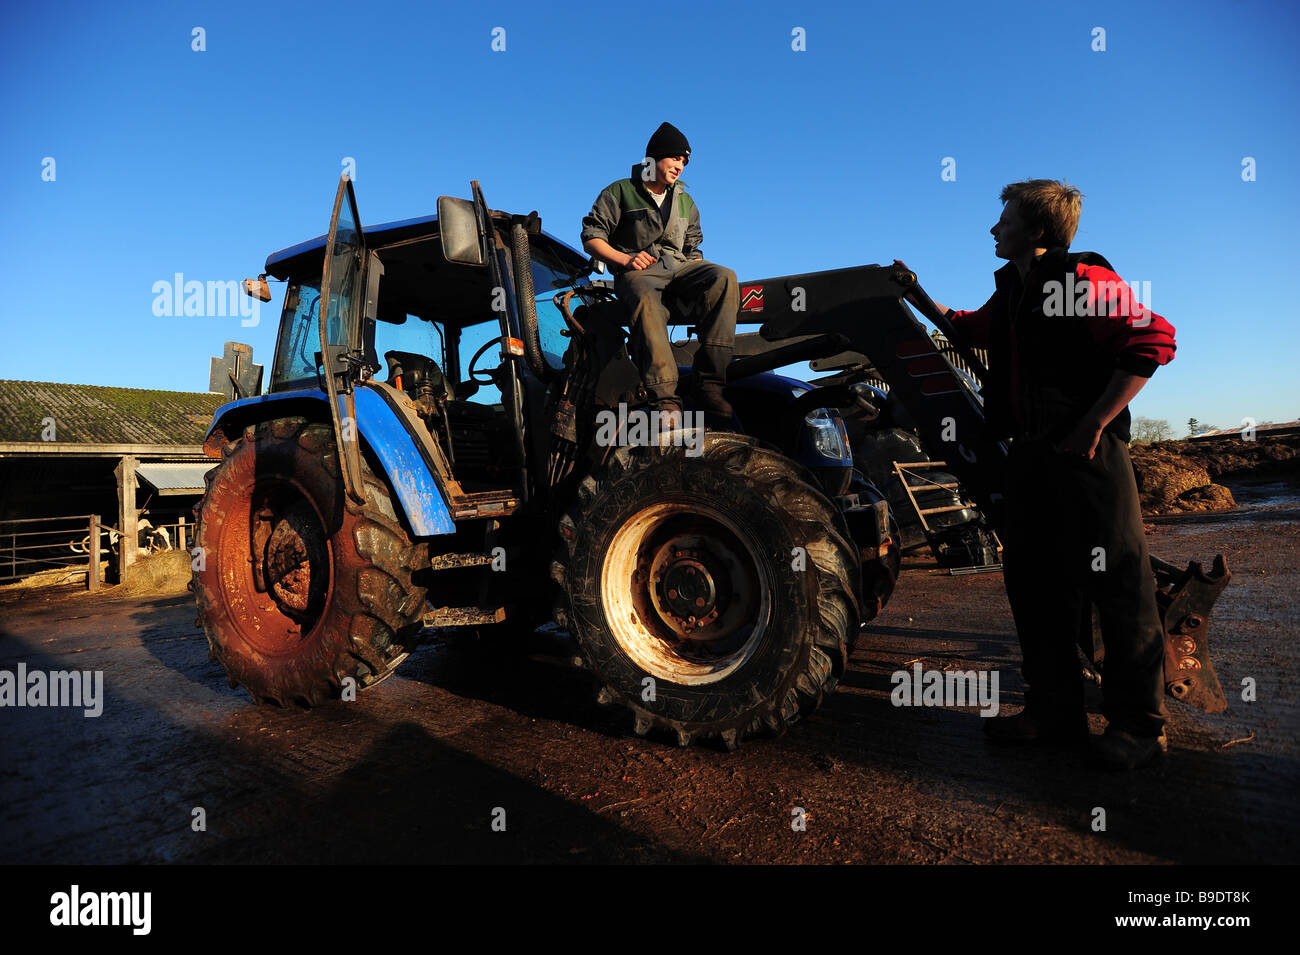 Students at Brymore School in Cannington near Bridgwater Somerset standing with a tractor Stock Photo